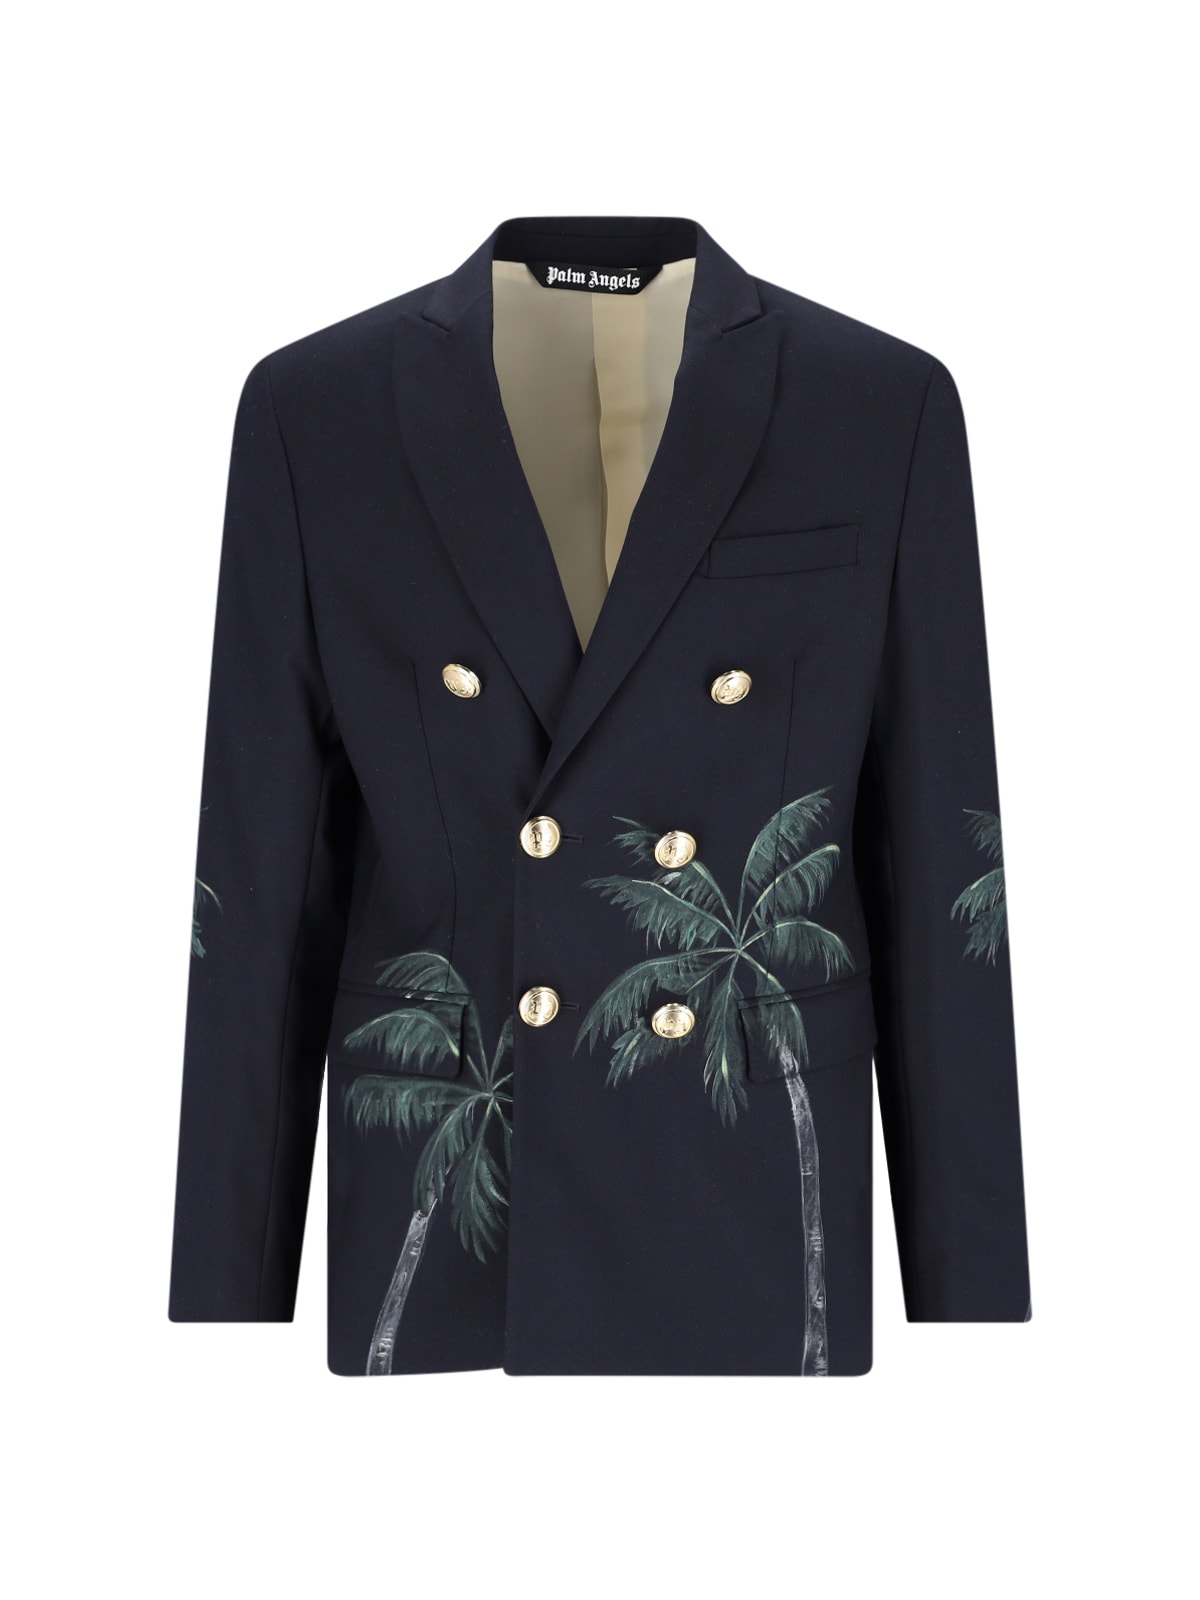 Shop Palm Angels Printed Double Breast Blazer